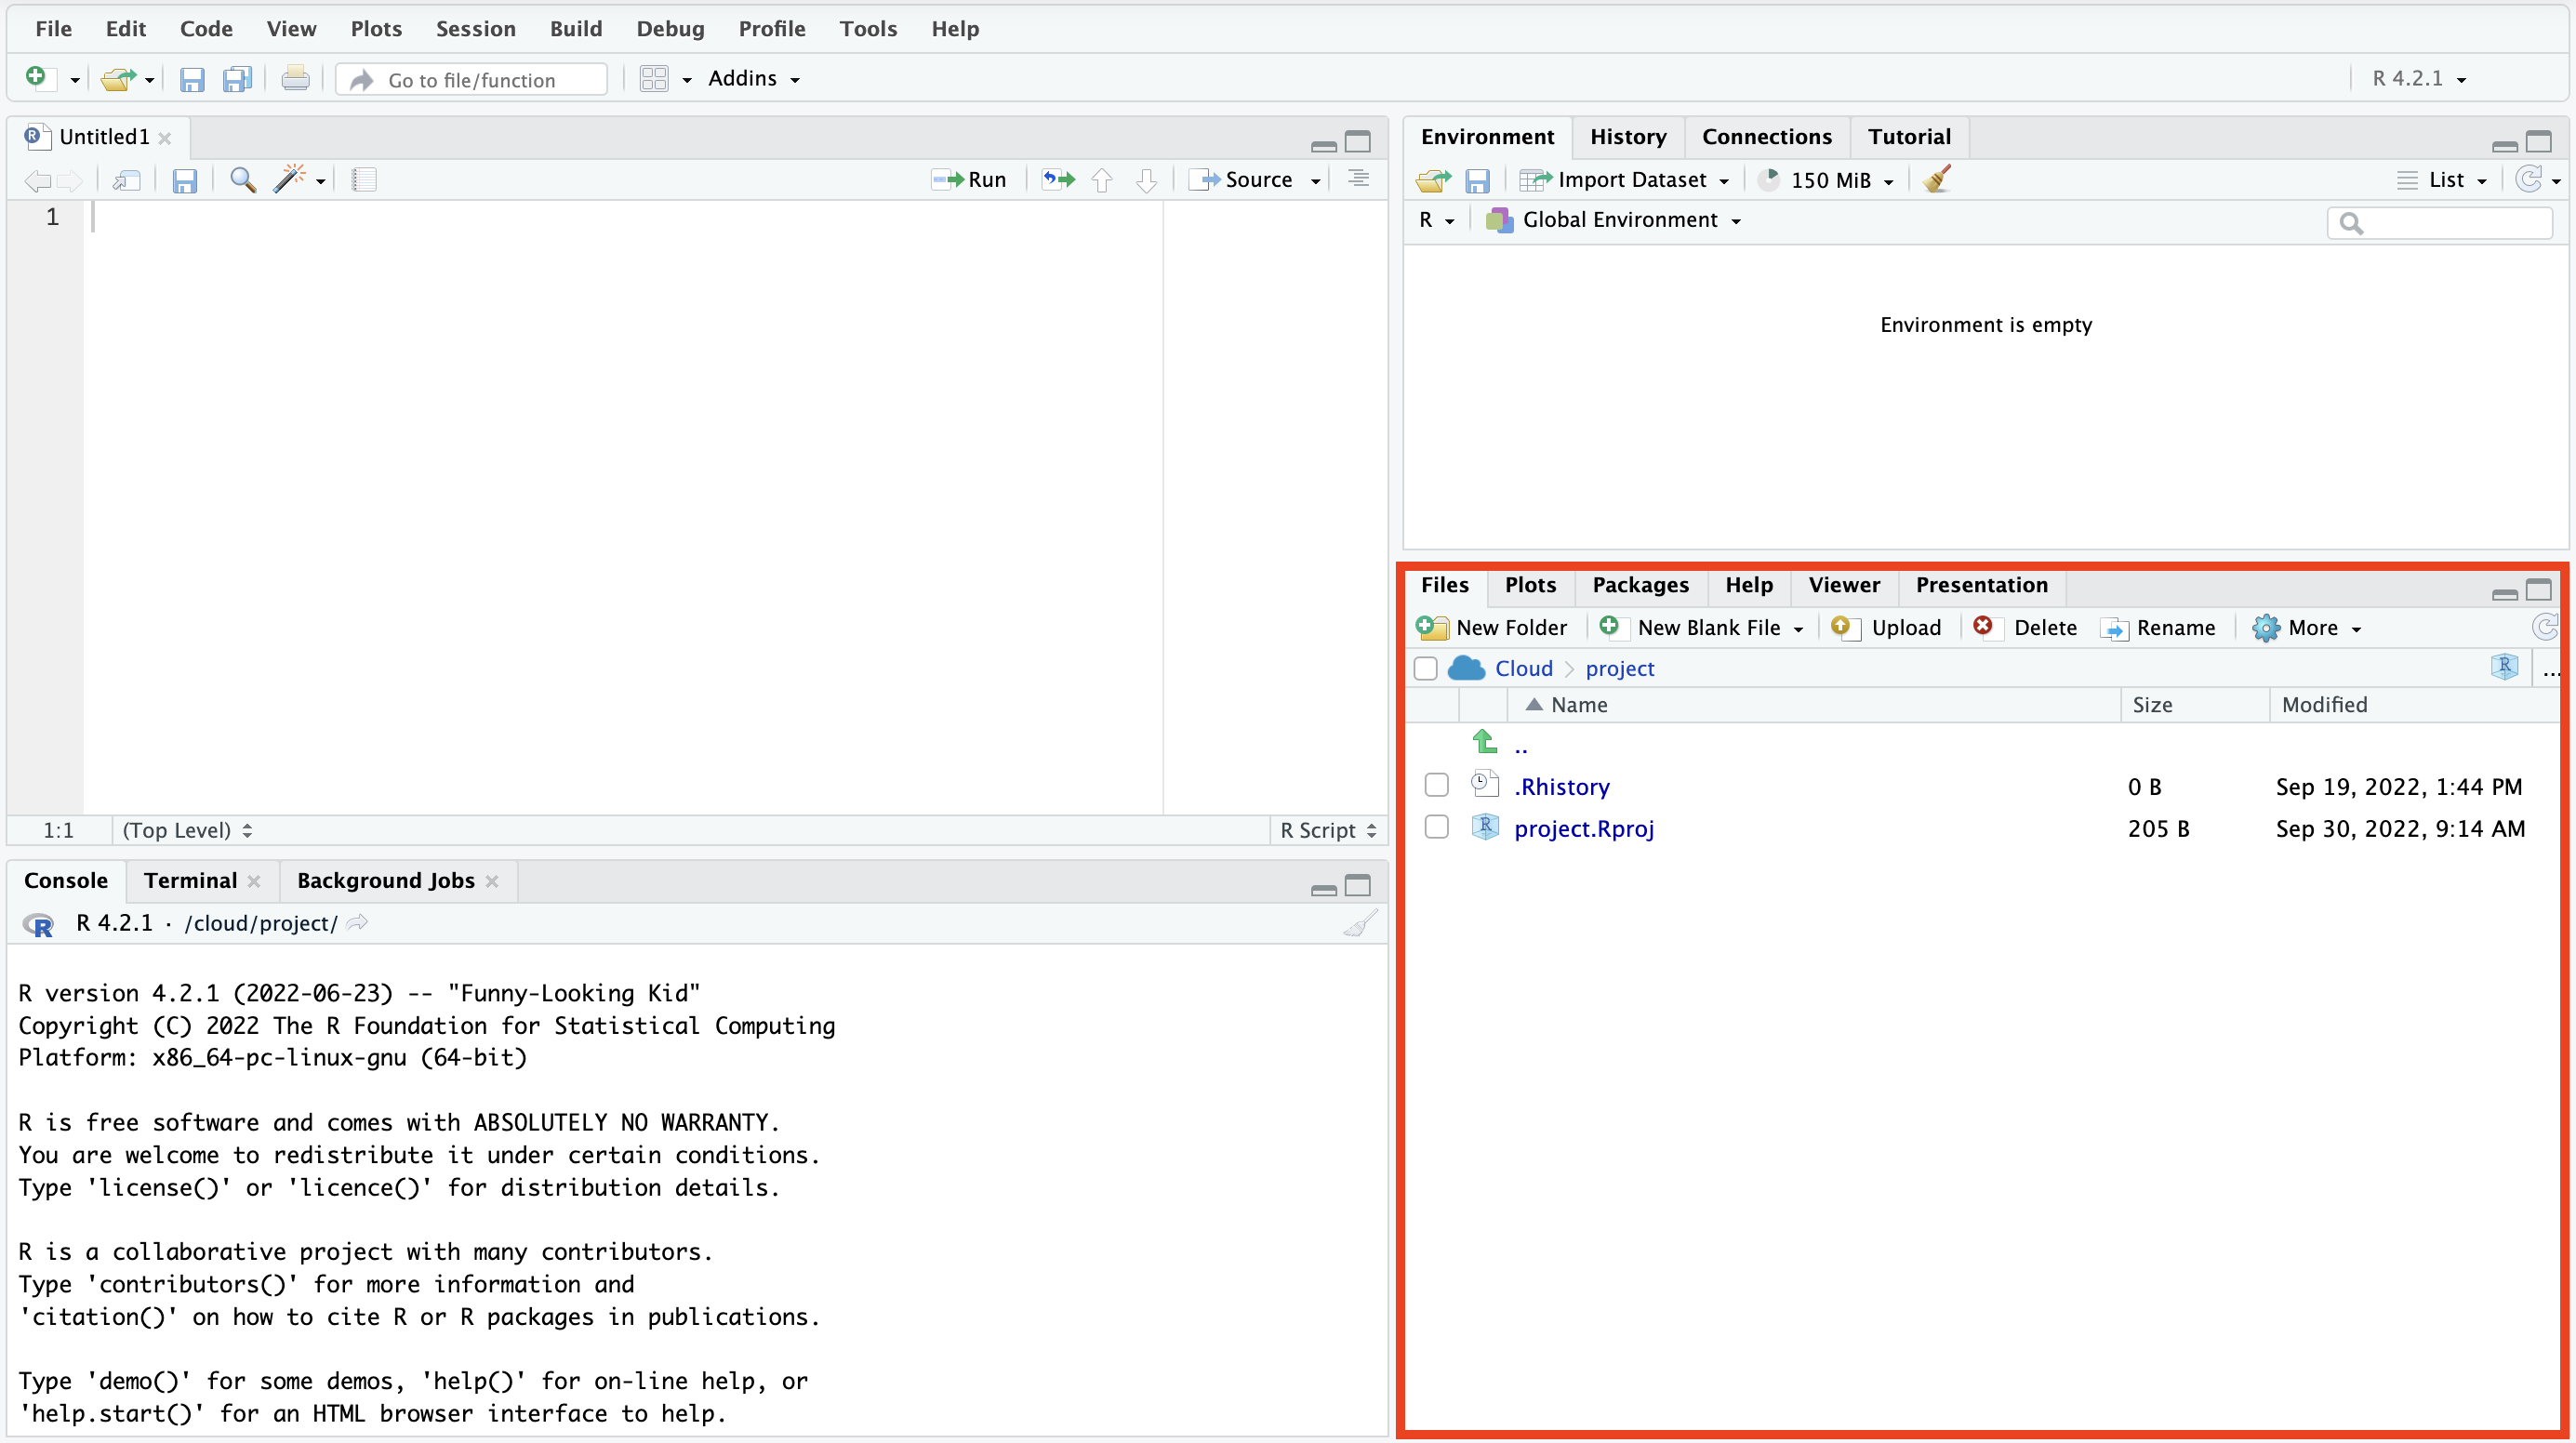 The RStudio interface with the pane for files and packages highlighted in red